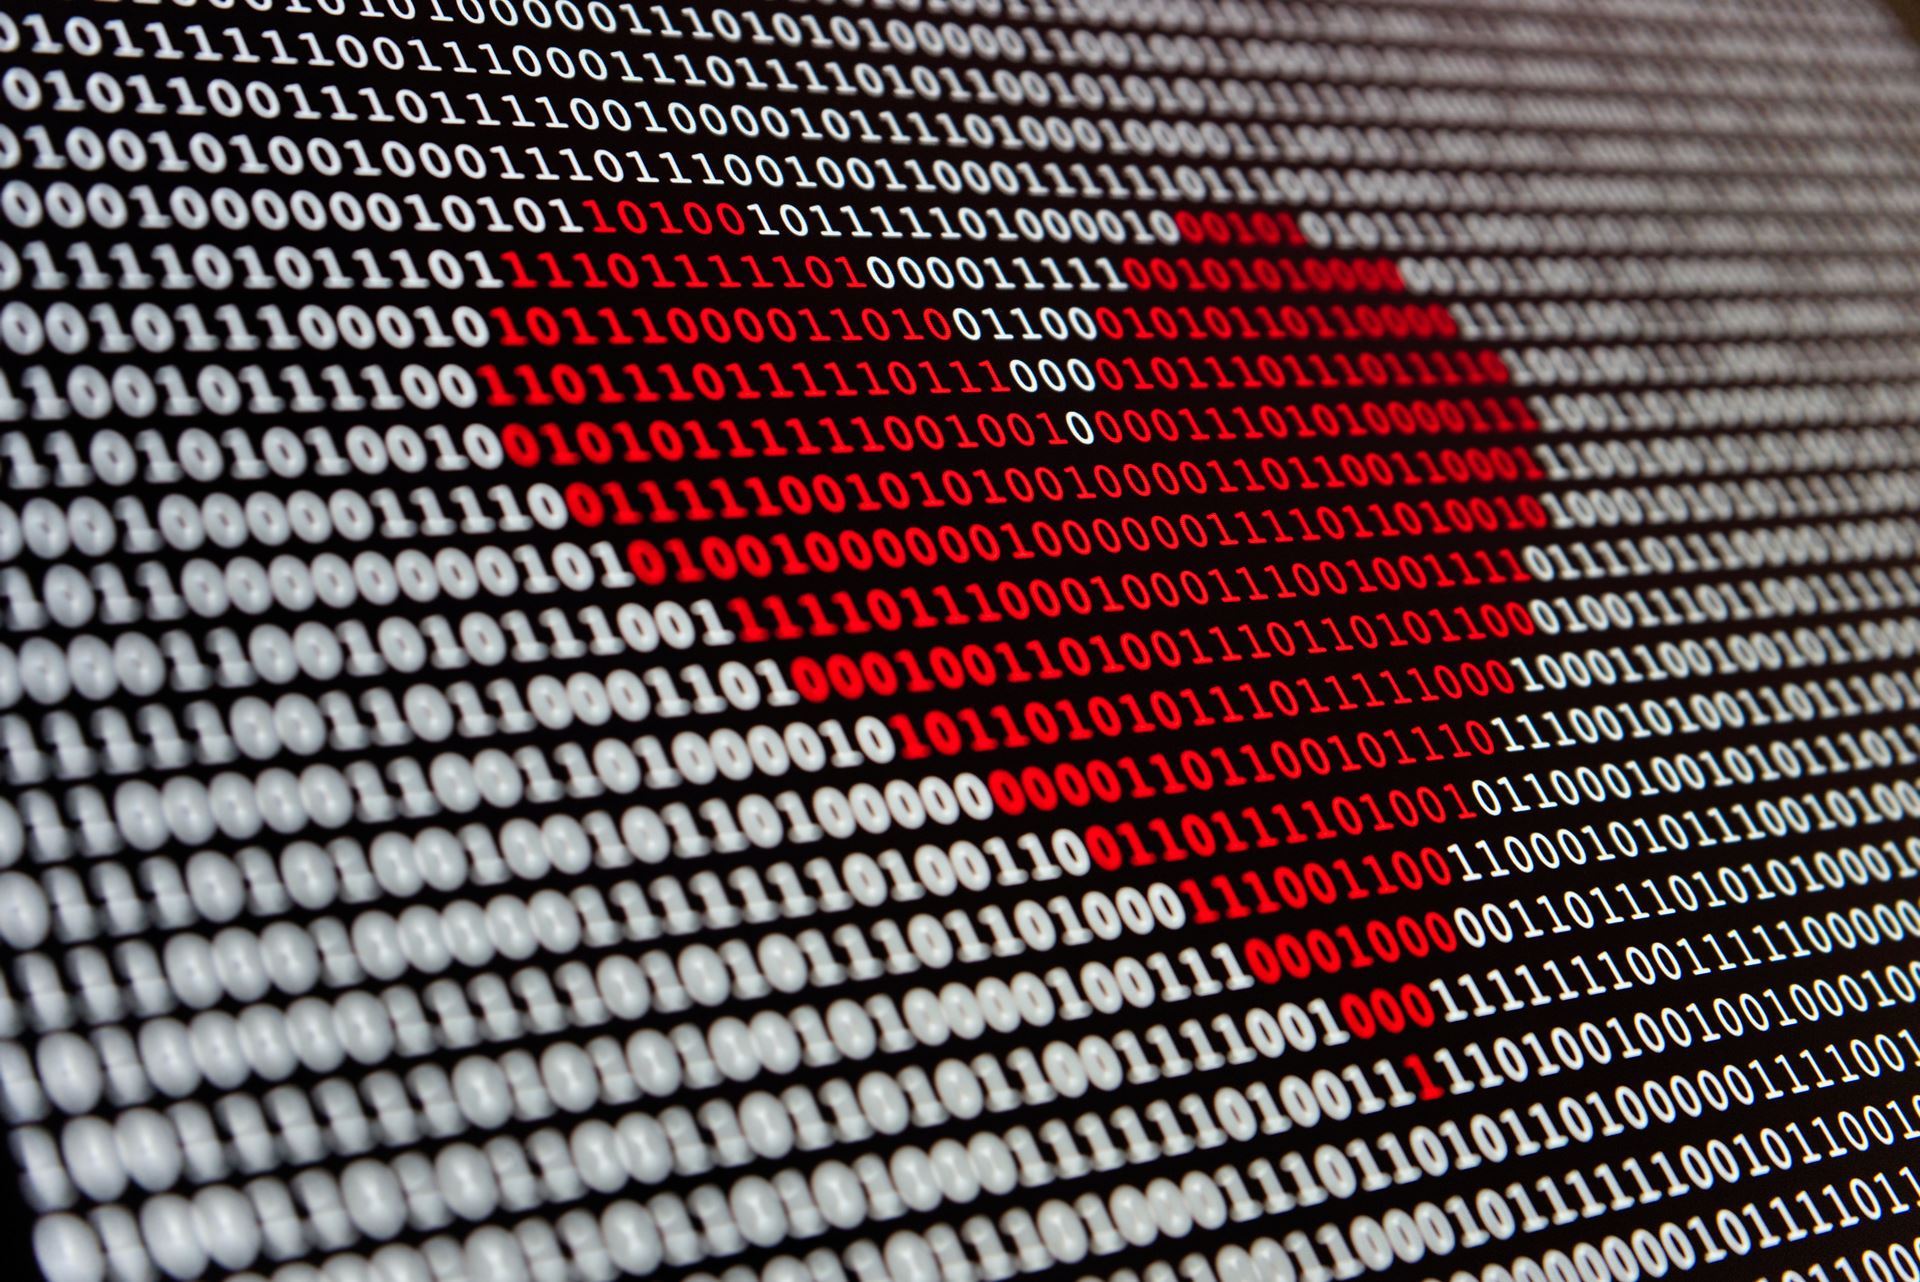 A screen with white binary 0s and 1s against a black background. In the centre, some of the binary numbers are in red font that forms a heart shape.